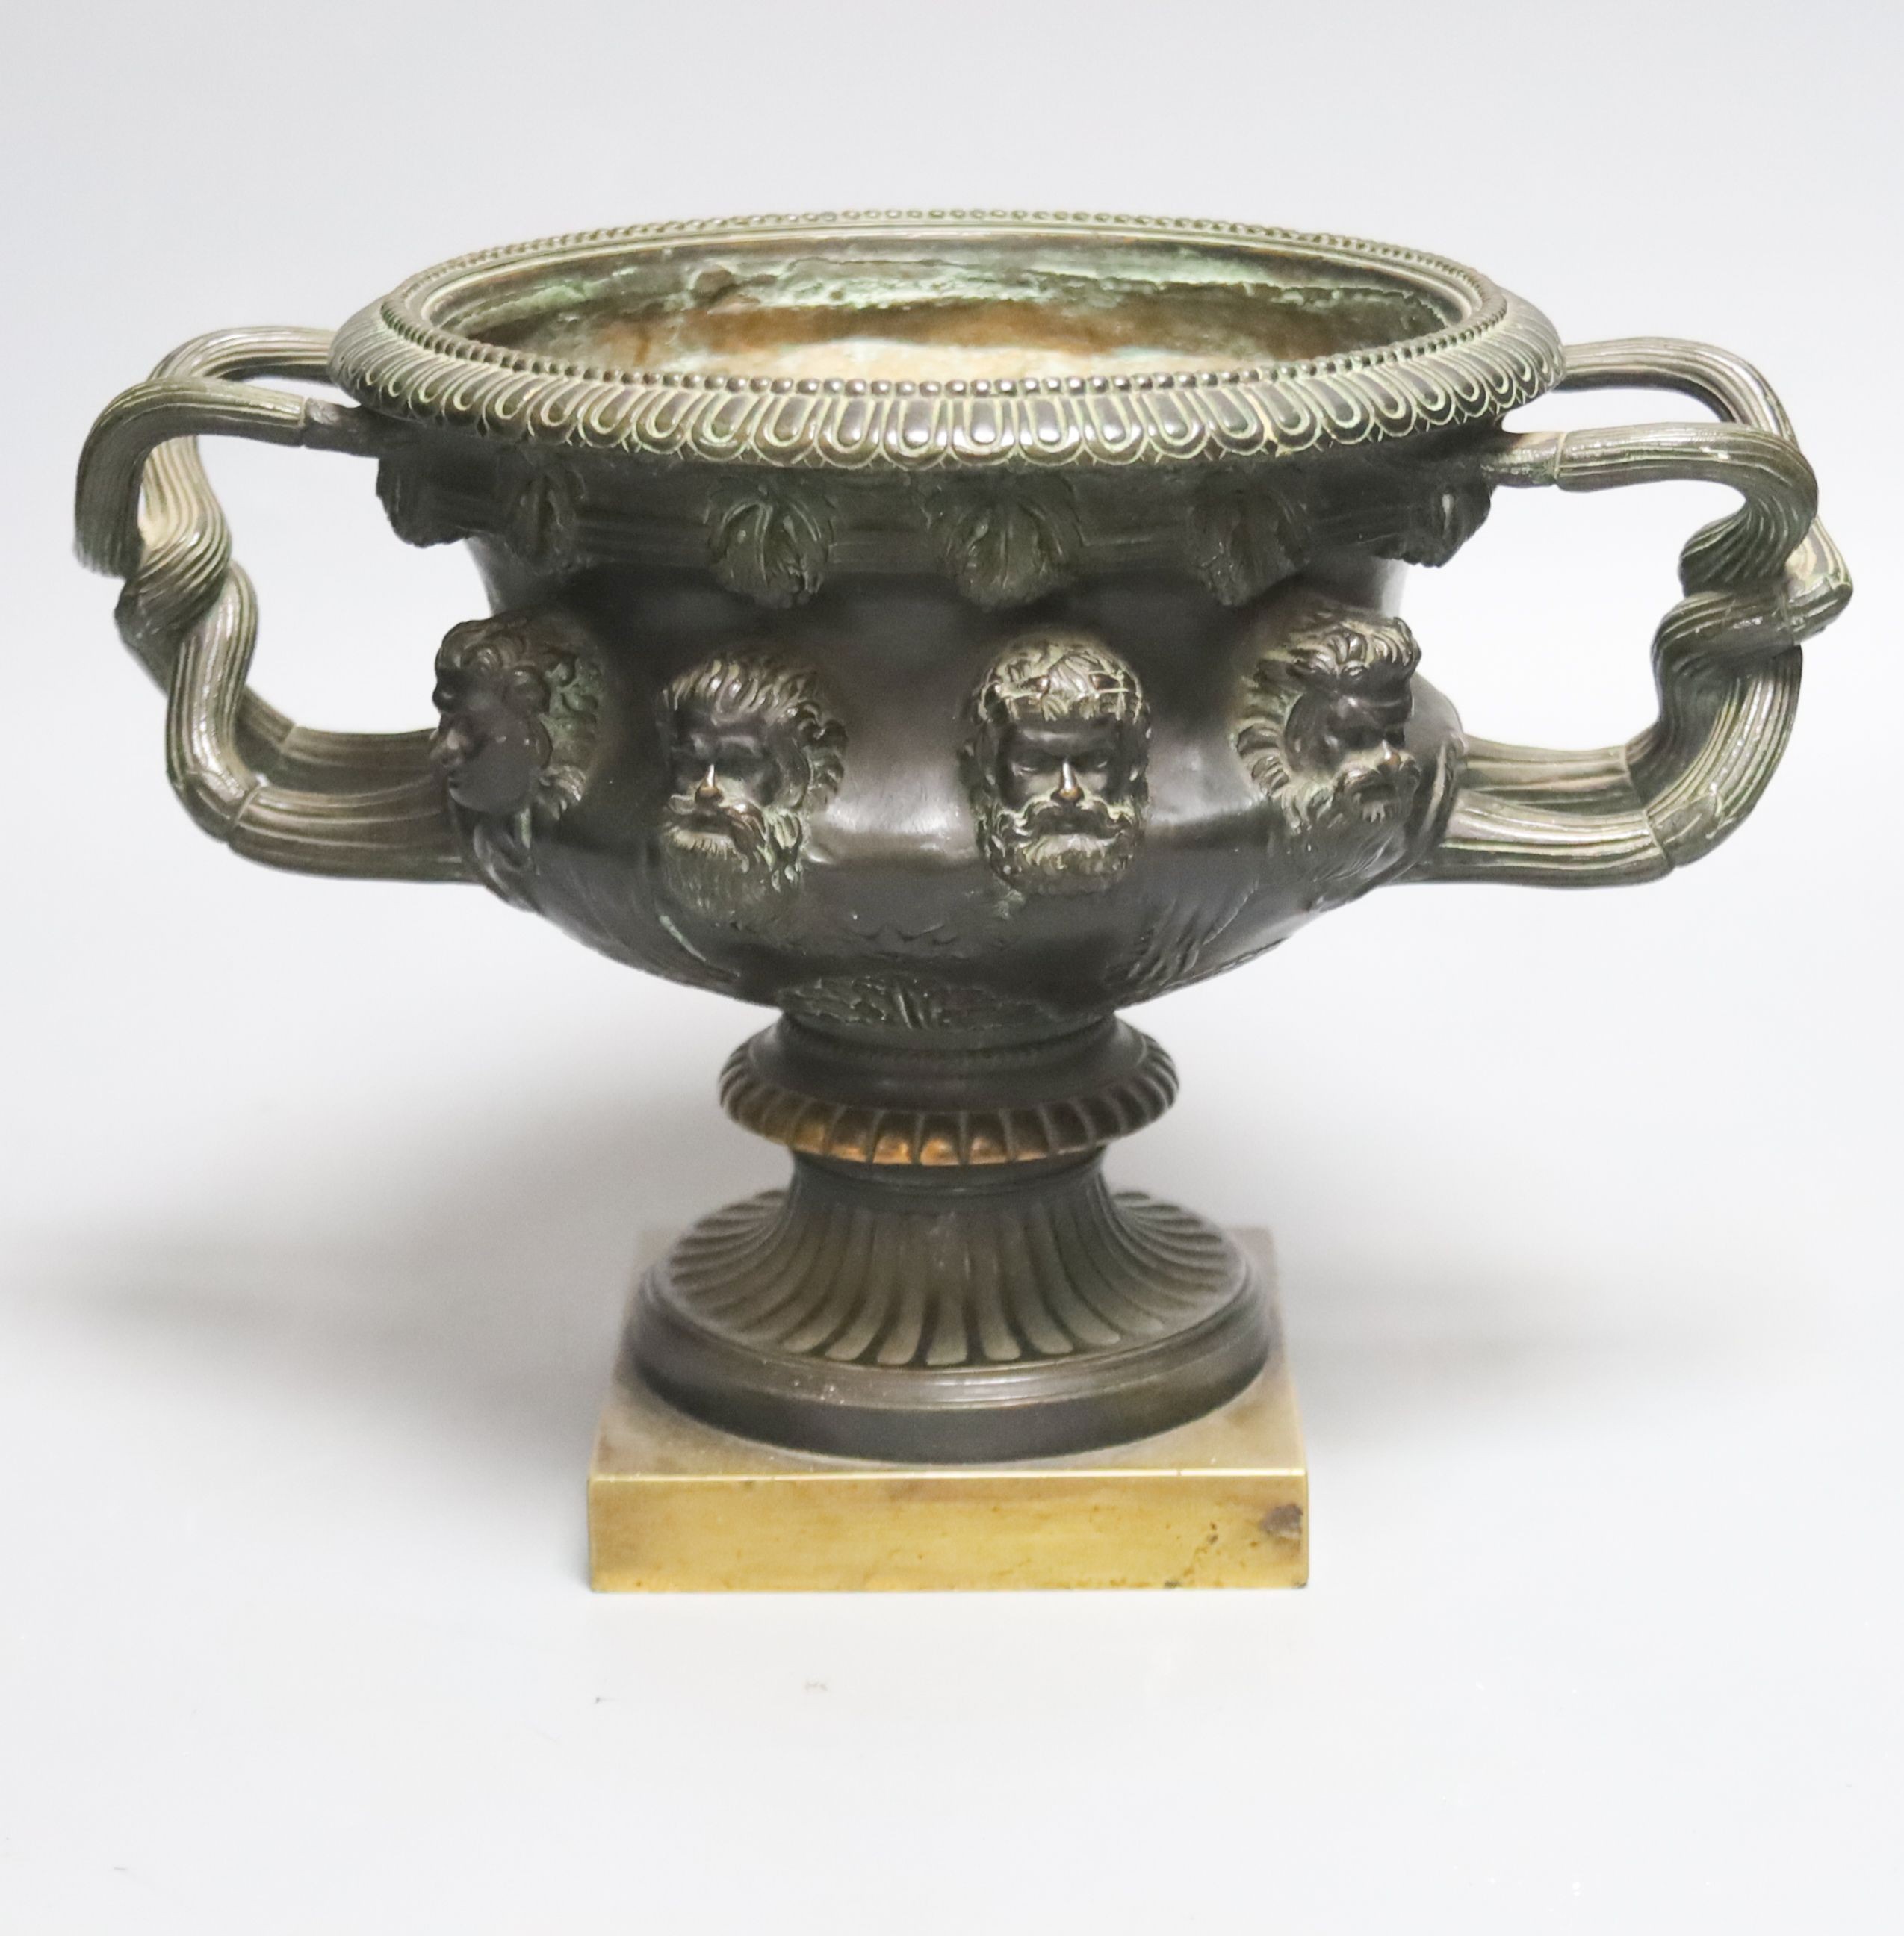 After the antique a bronze Warwick vase of typical form on square plinth foot. 19cm